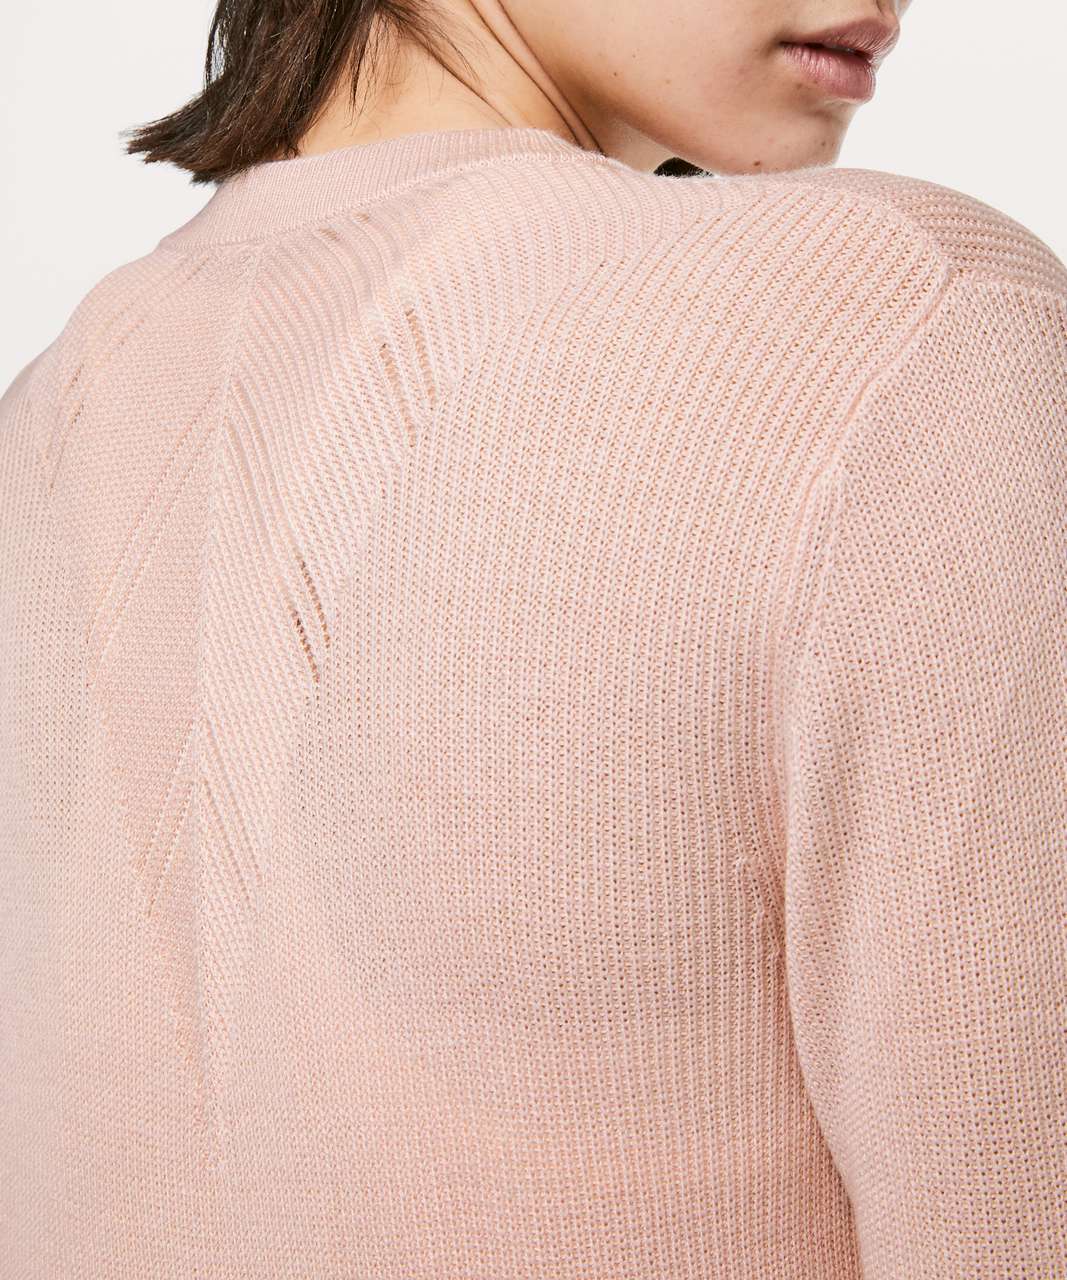 Lululemon Time To Restore Sweater - Misty Pink